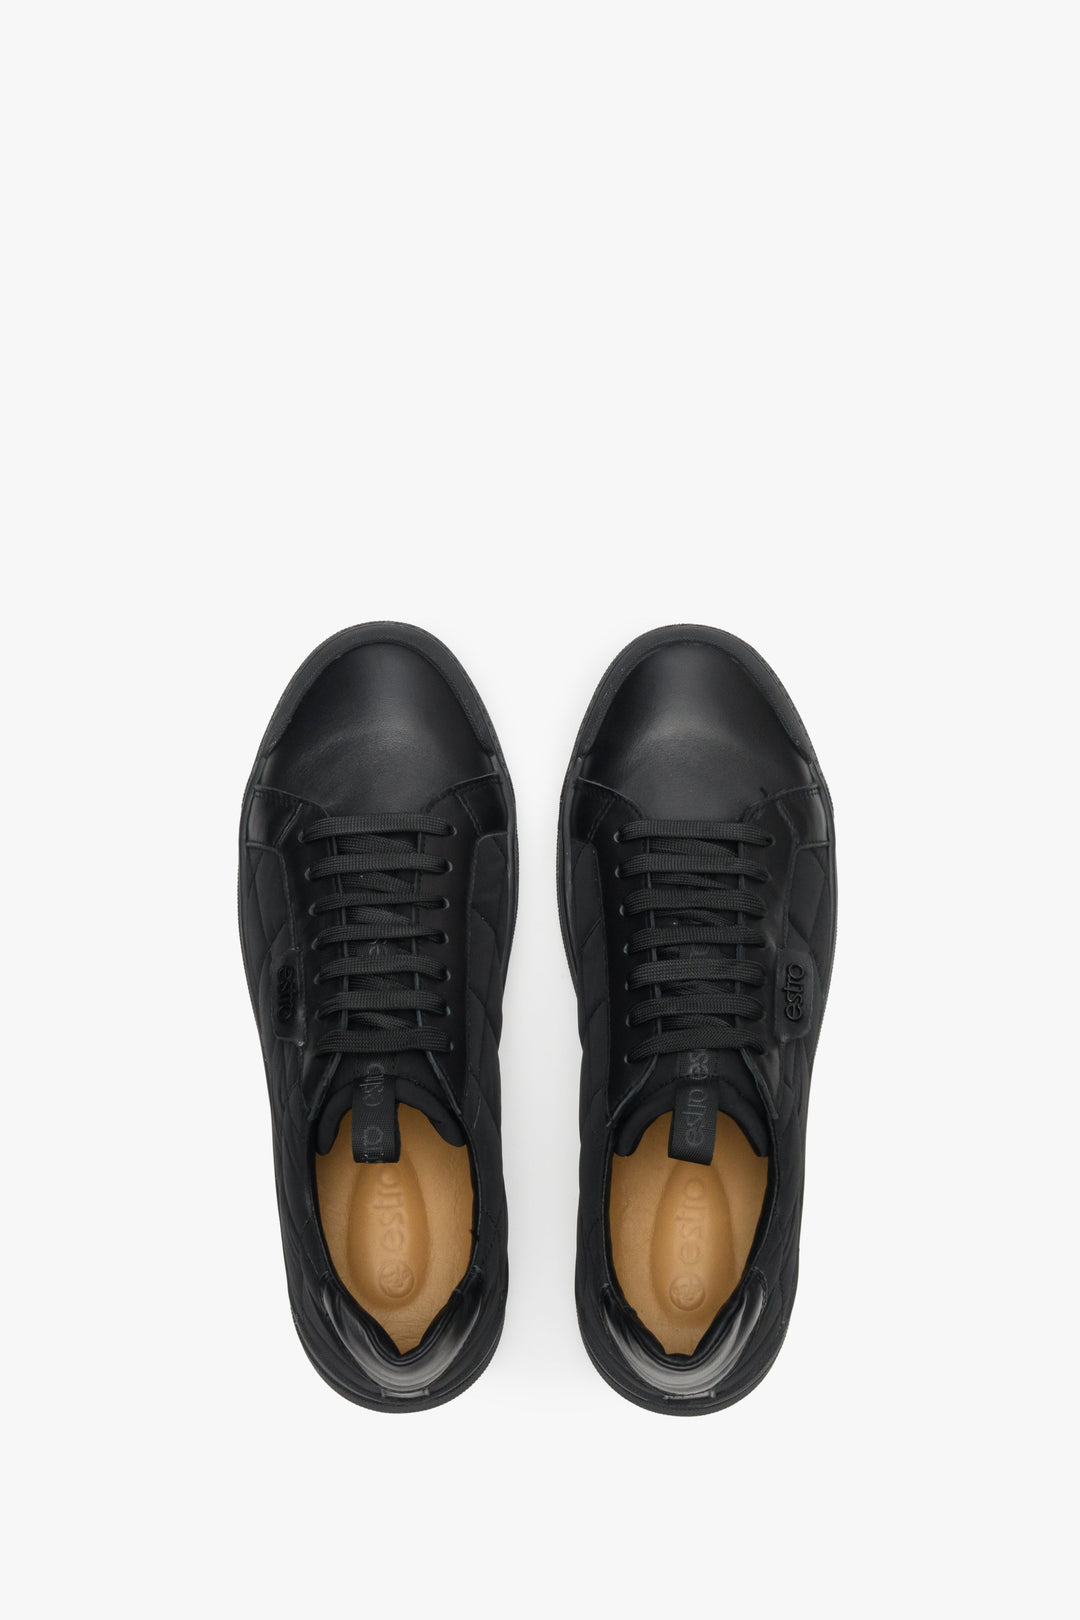 Men's black spring and autumn Estro sneakers - footwear presentation from above.